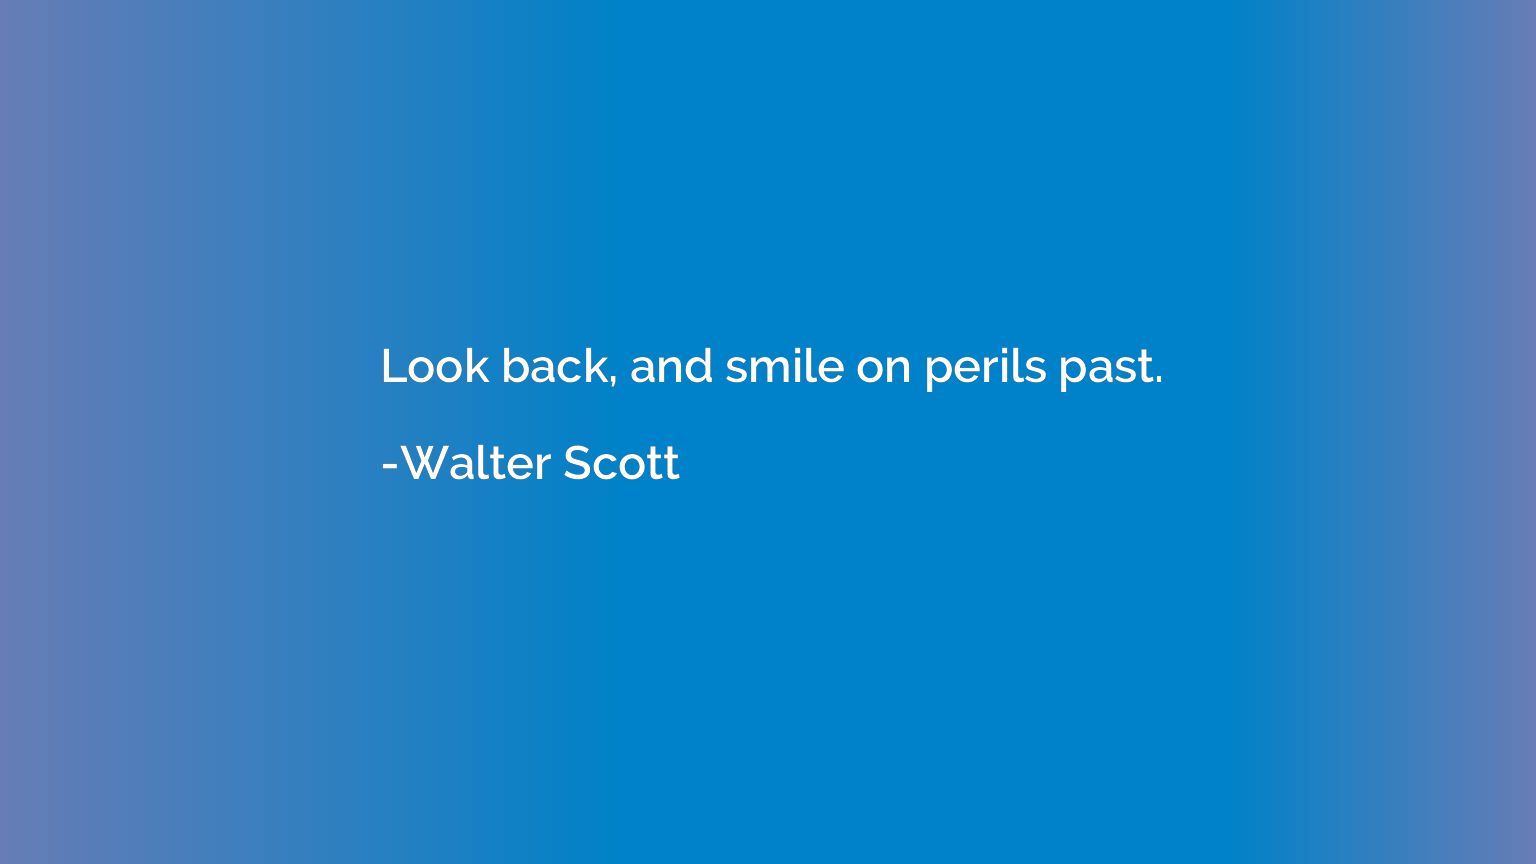 Look back, and smile on perils past.